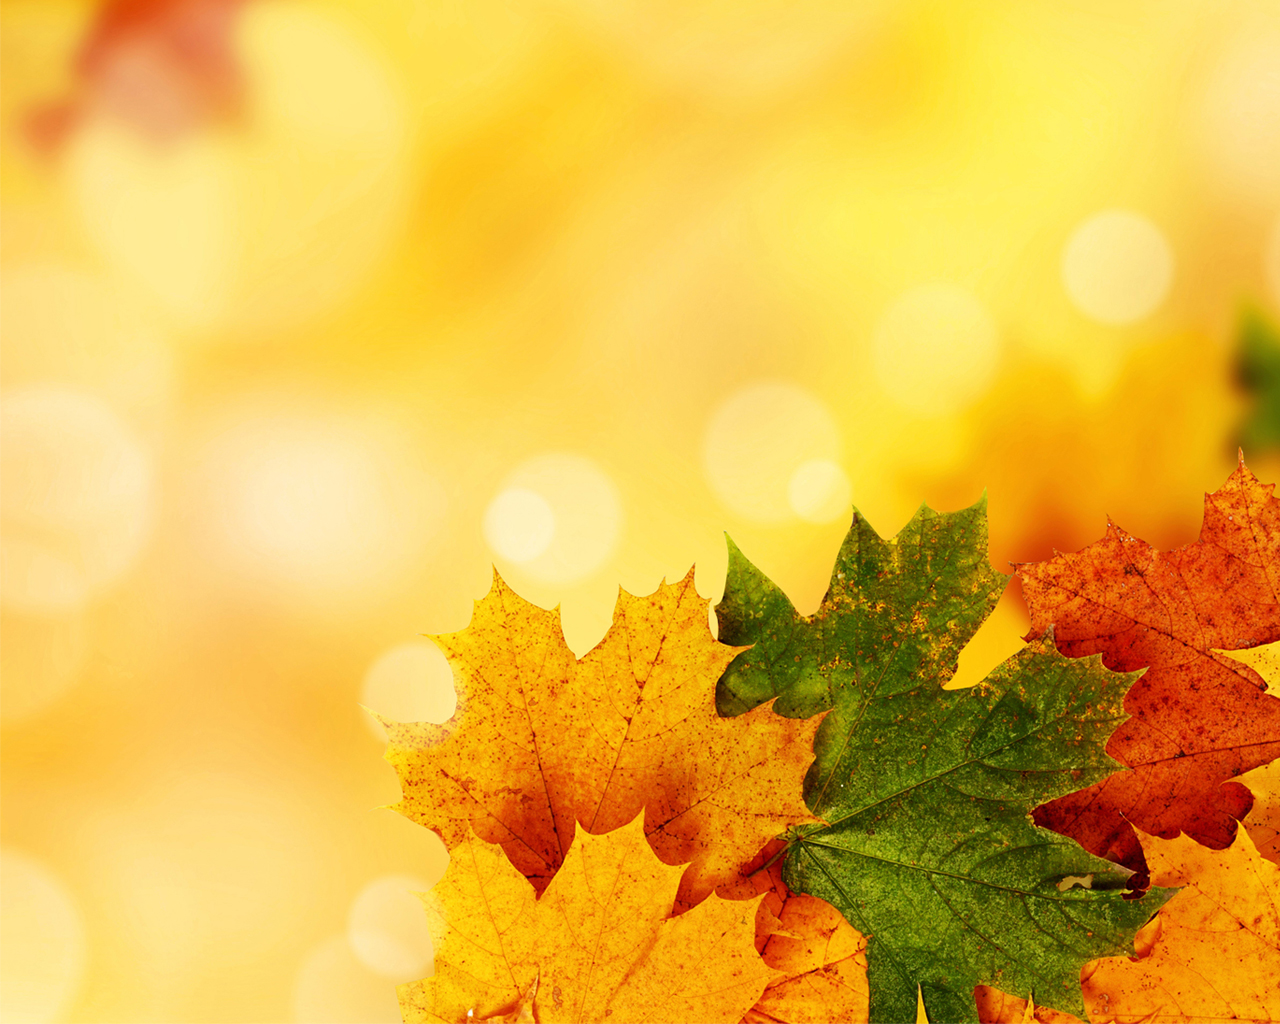 This is the Yellow Autumn background image You can use PowerPoint